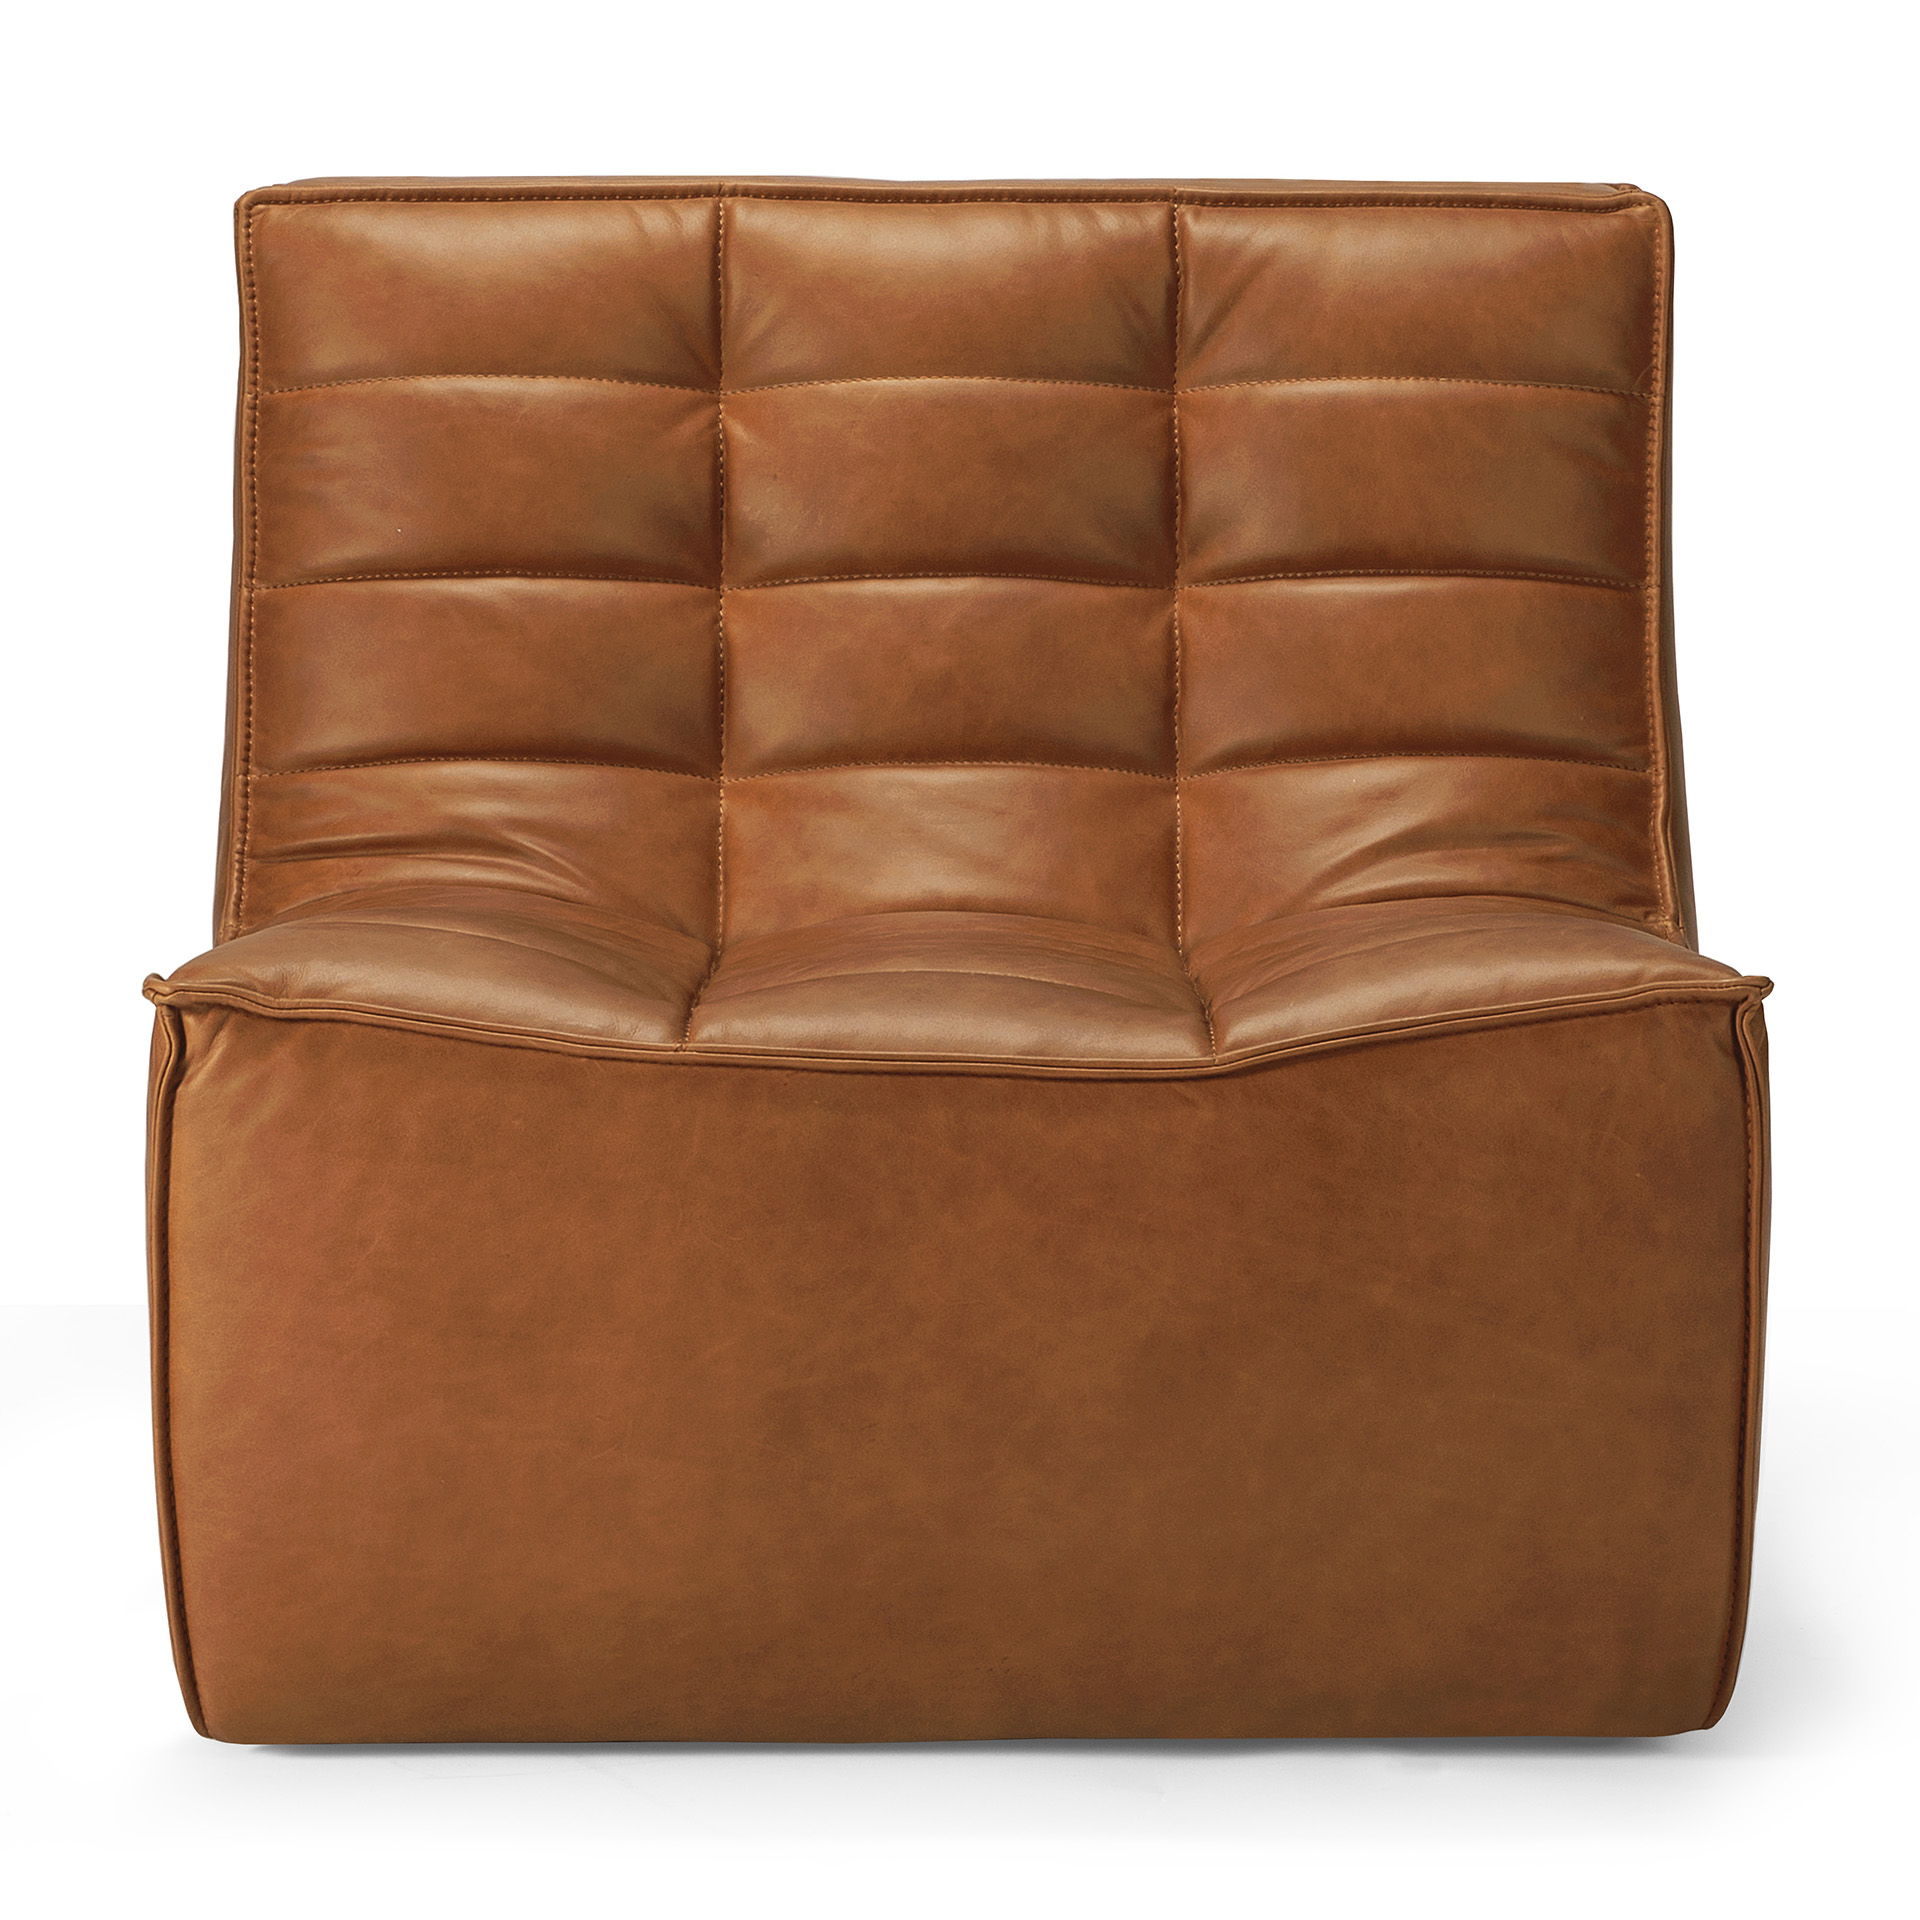 Ethnicraft N701 1-Seater Old Saddle Leather